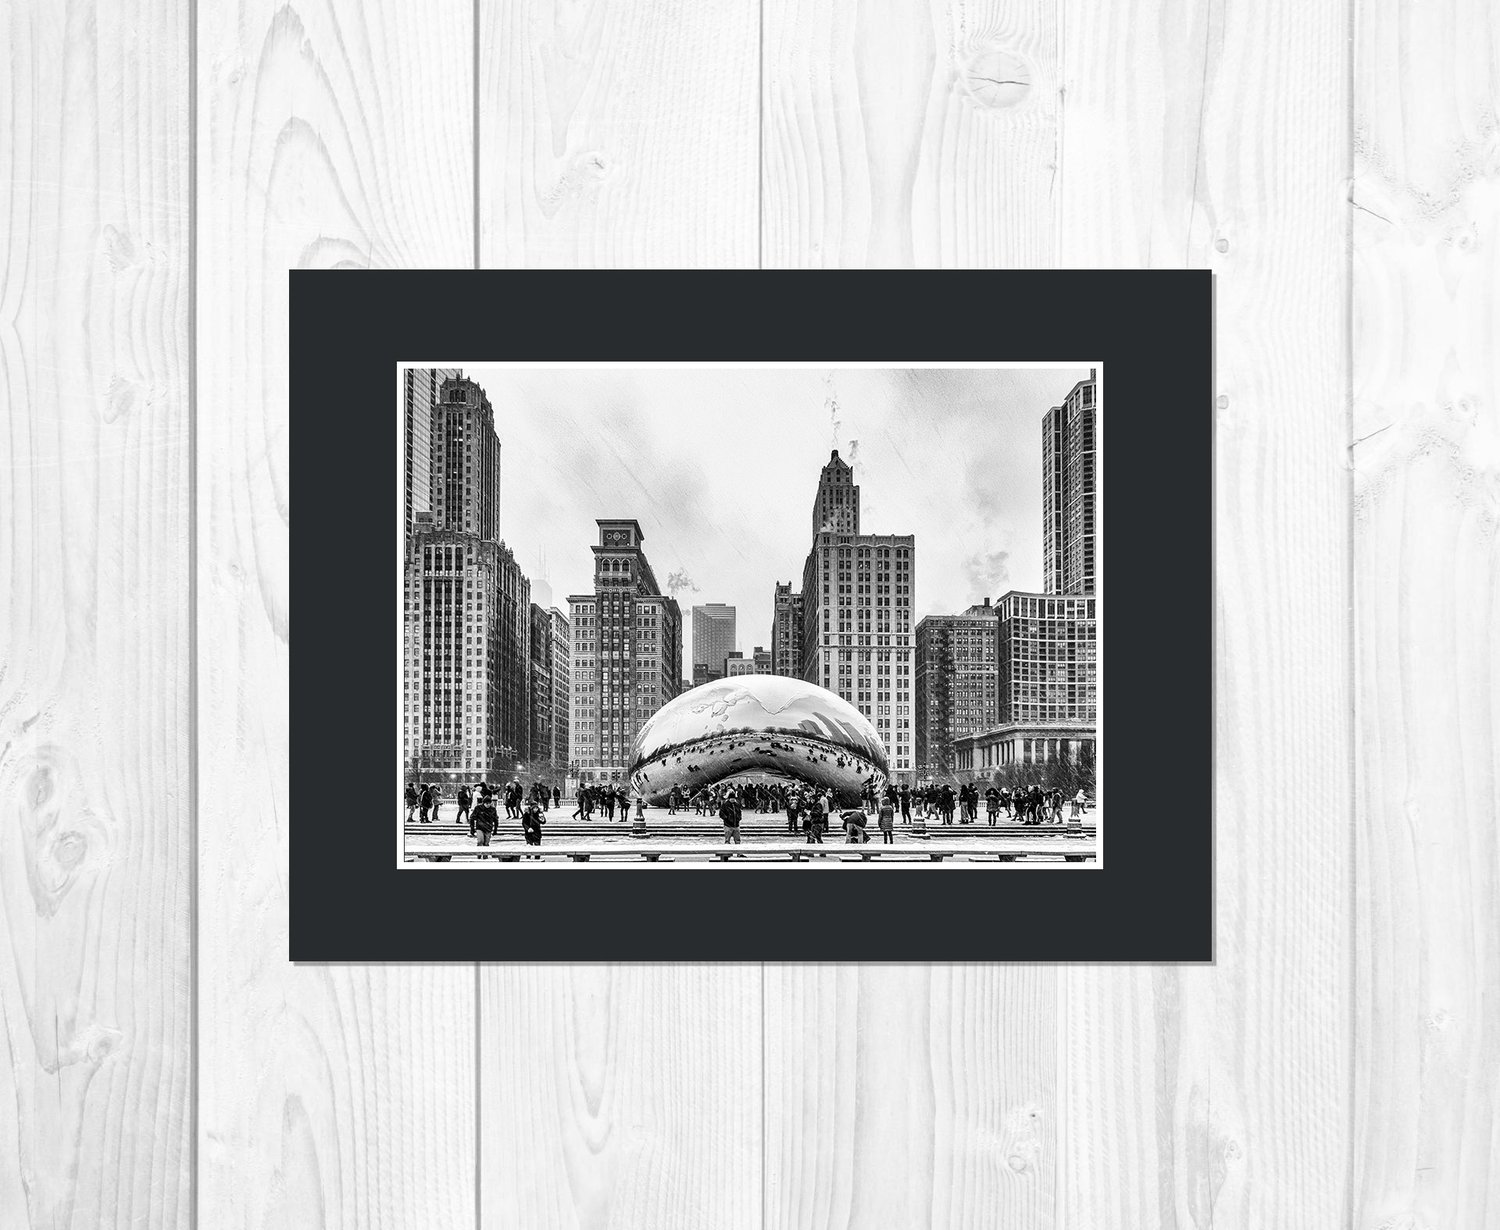 Limited Edition Print: "Snow At The Bean"